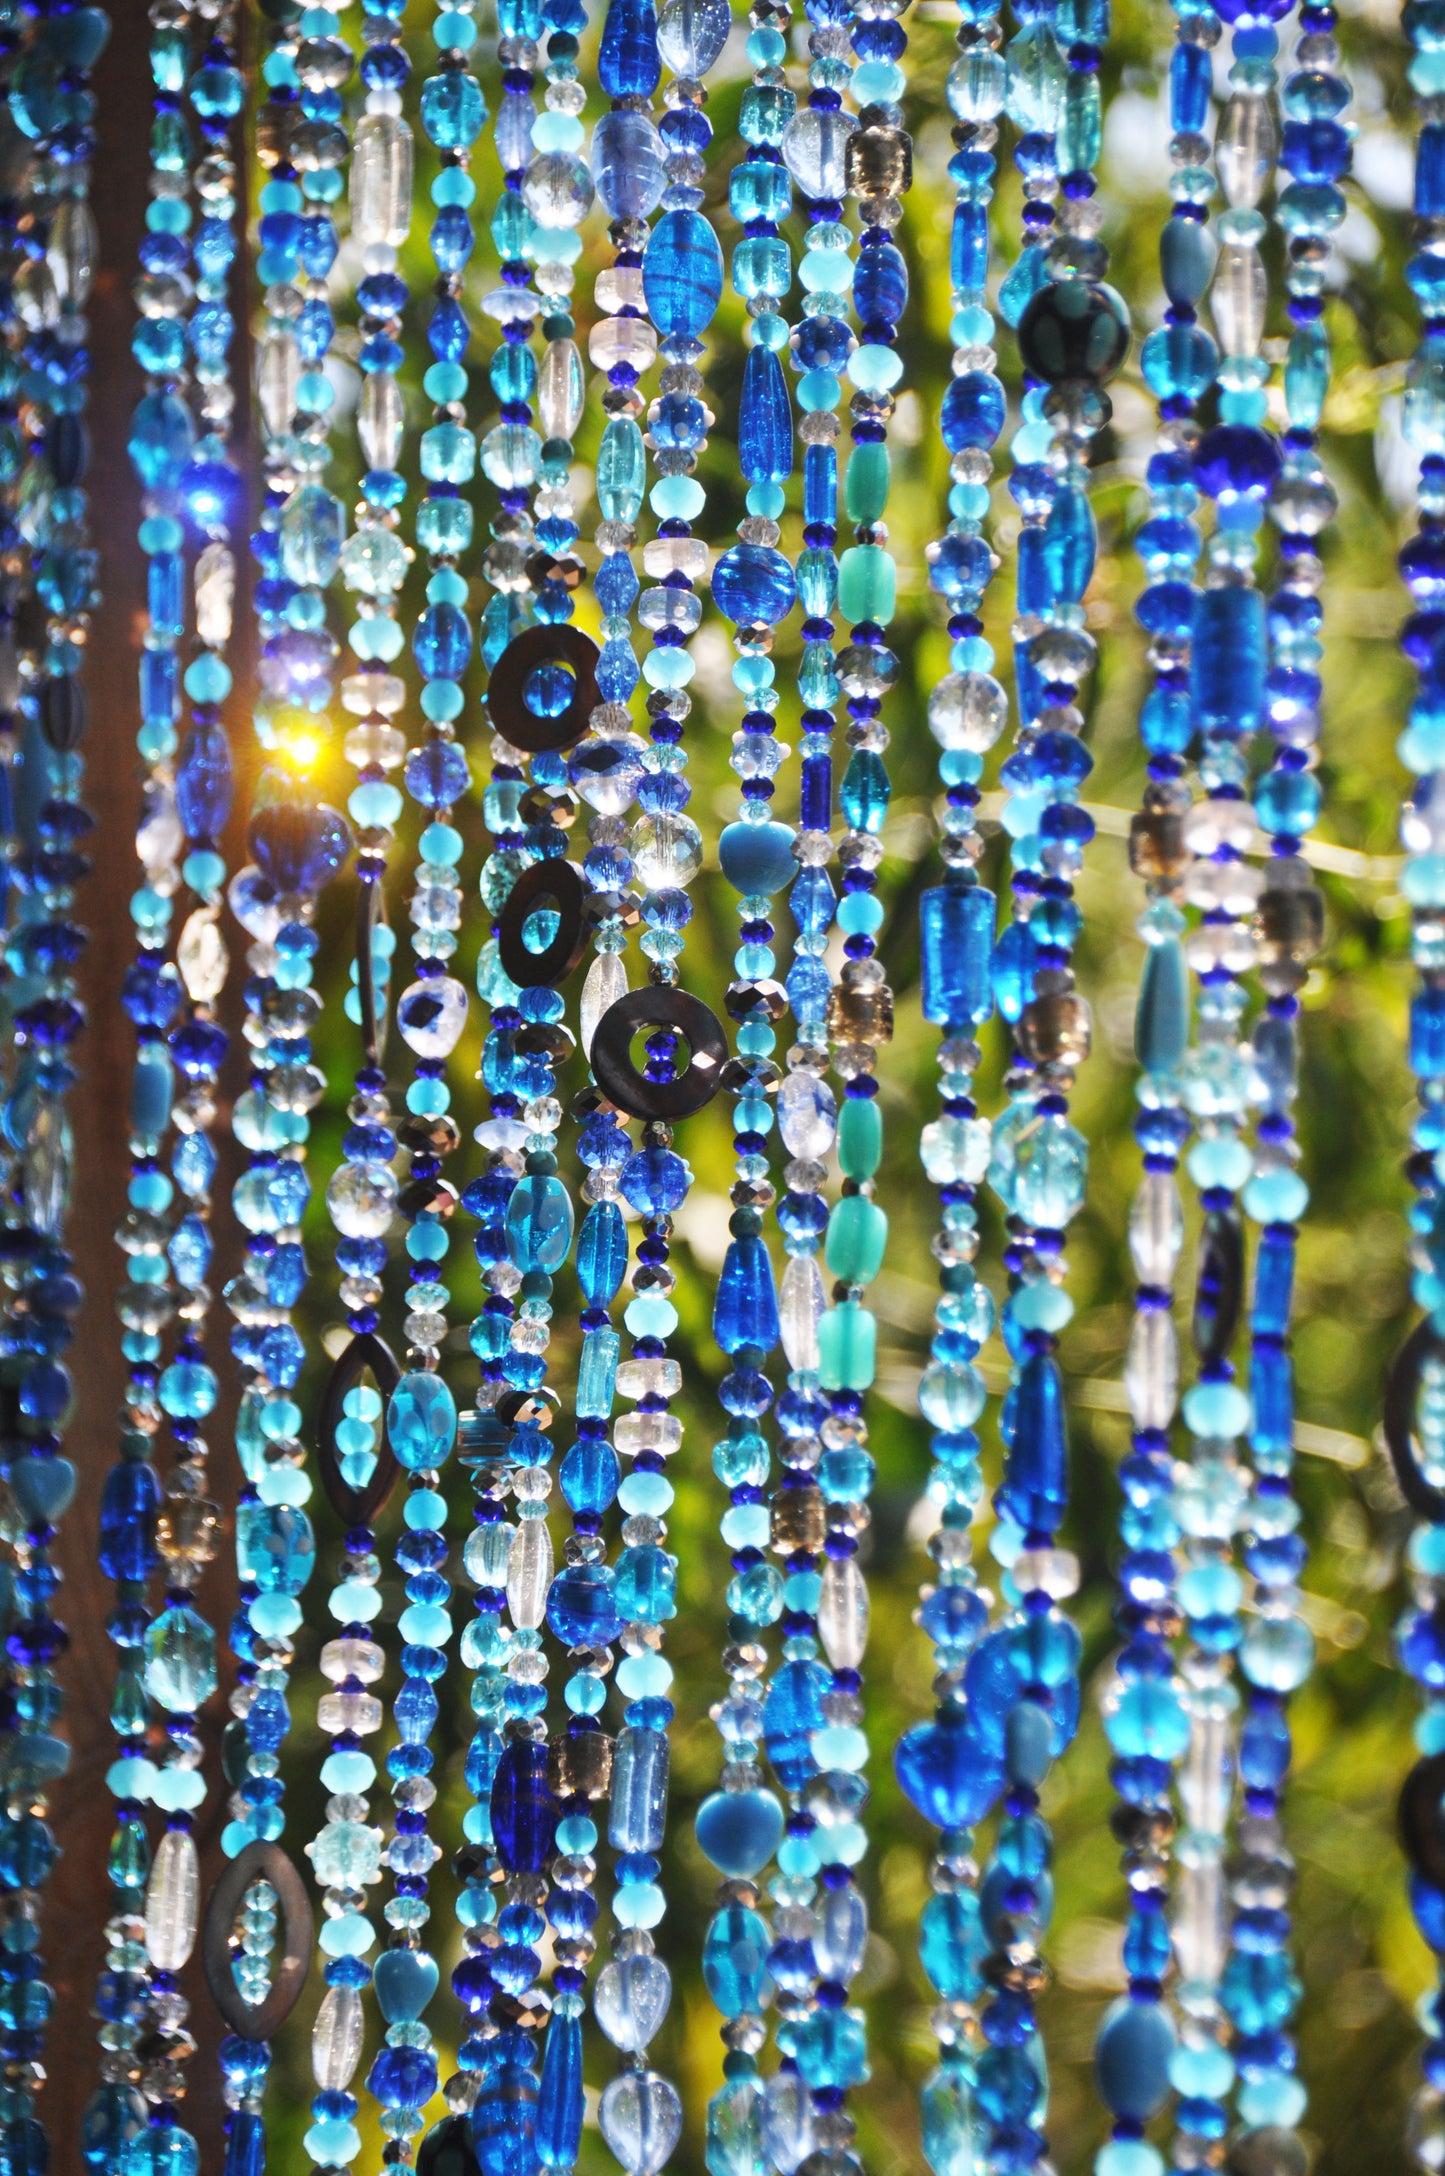 Beaded window Curtain in Shadows of Blue Turquoise Transparent and Grey